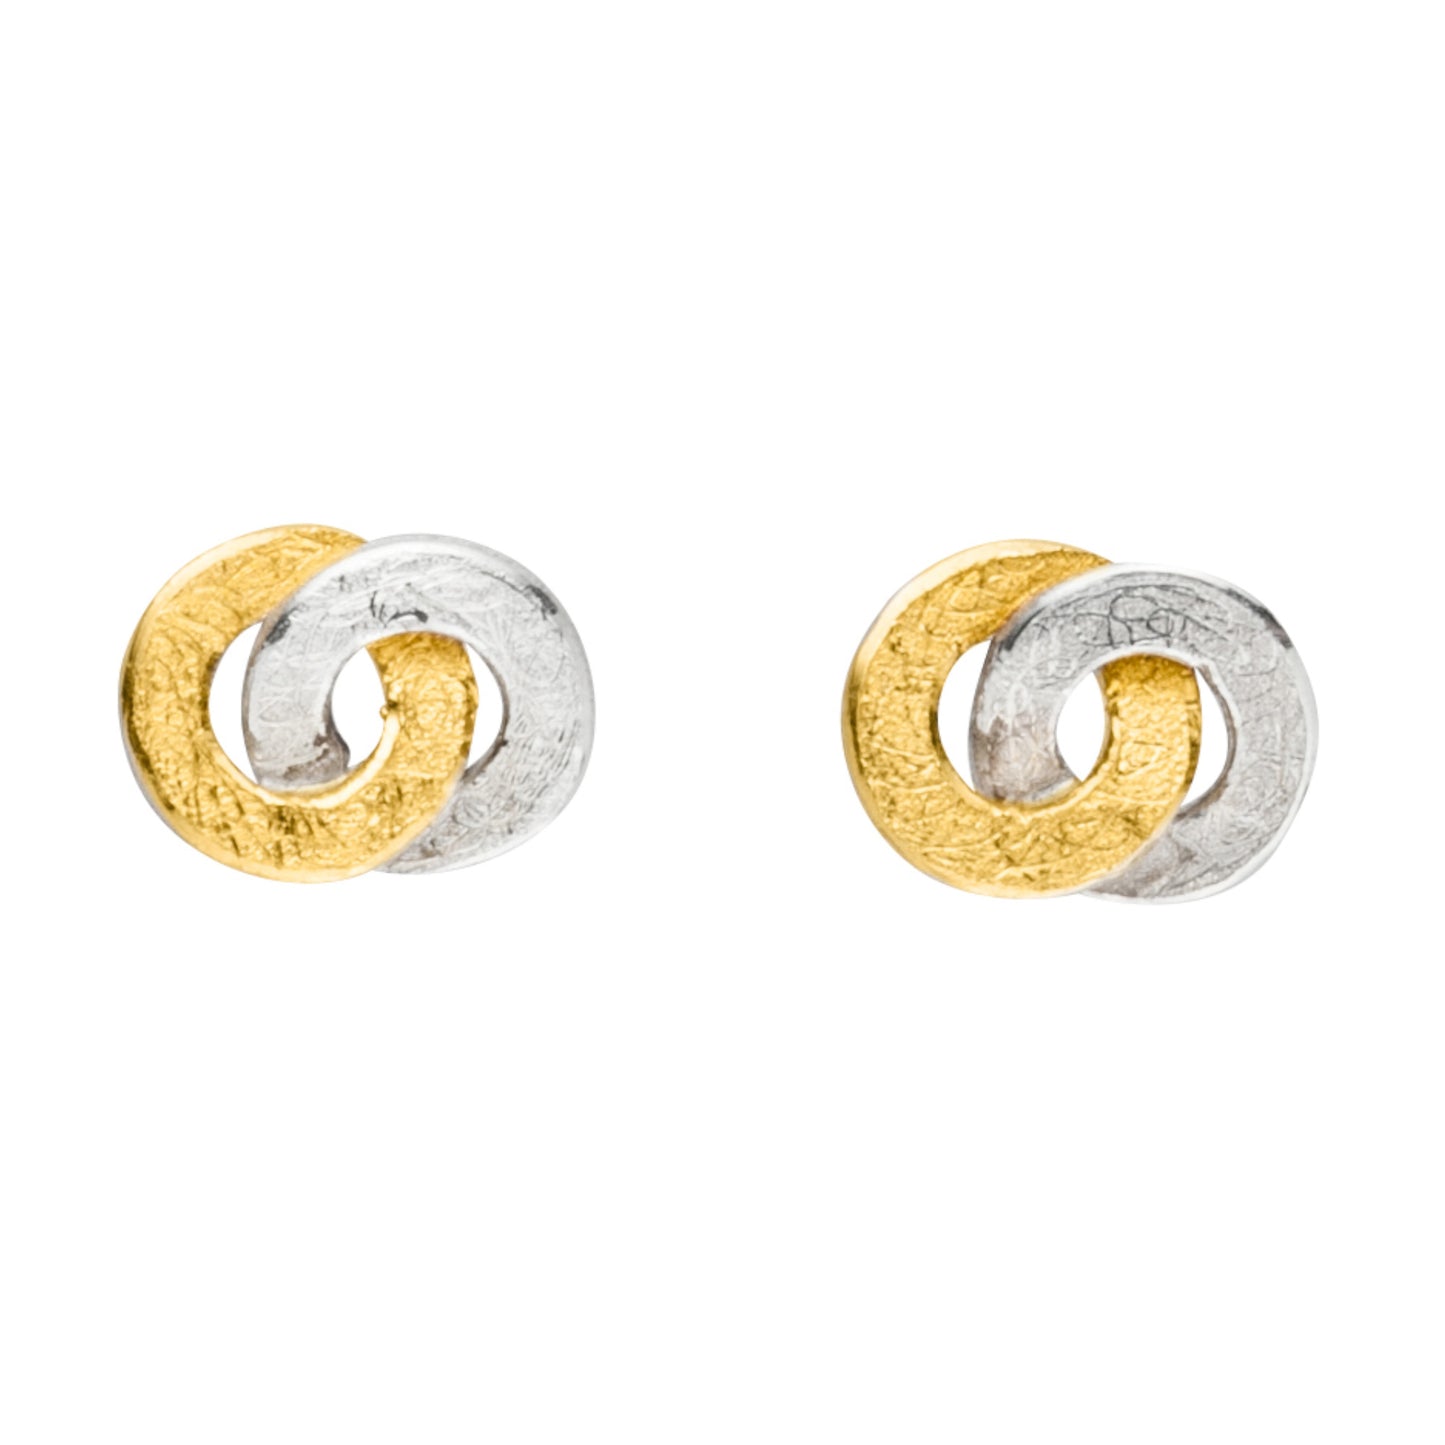 O391 - Silver and 24ct Gold Studs